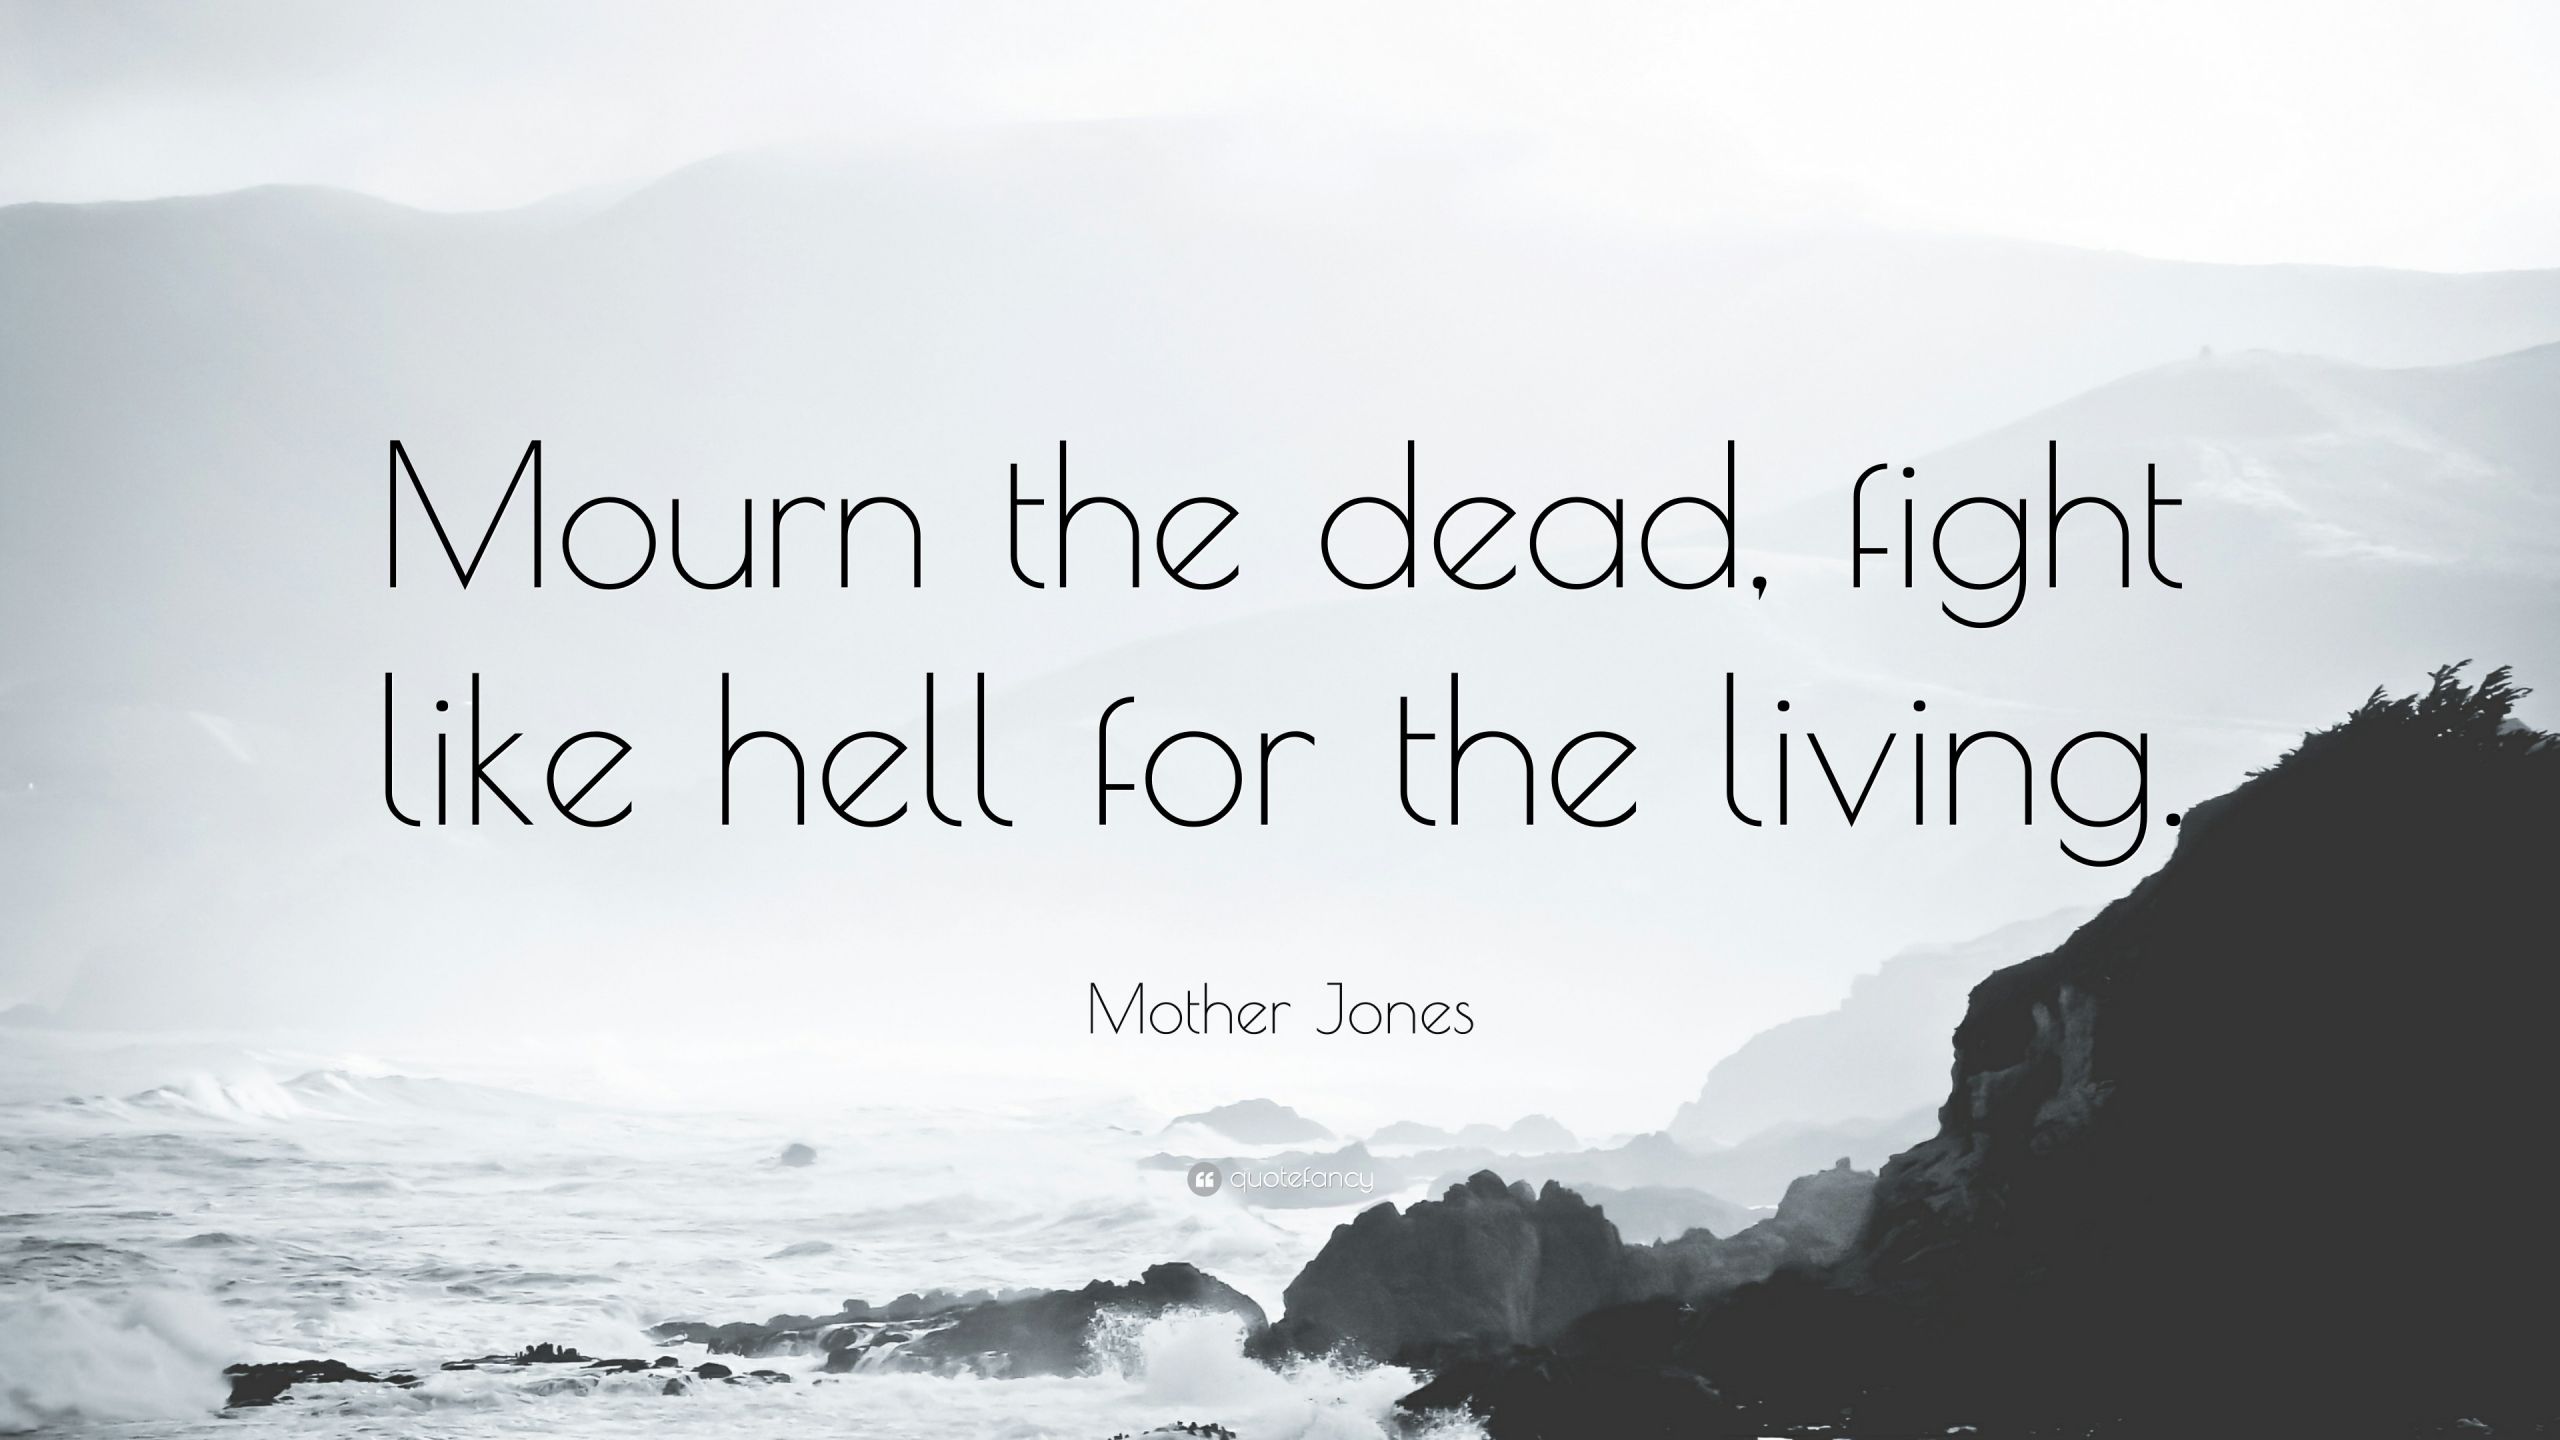 Mother Jones Quote
 Mother Jones Quote “Mourn the dead fight like hell for